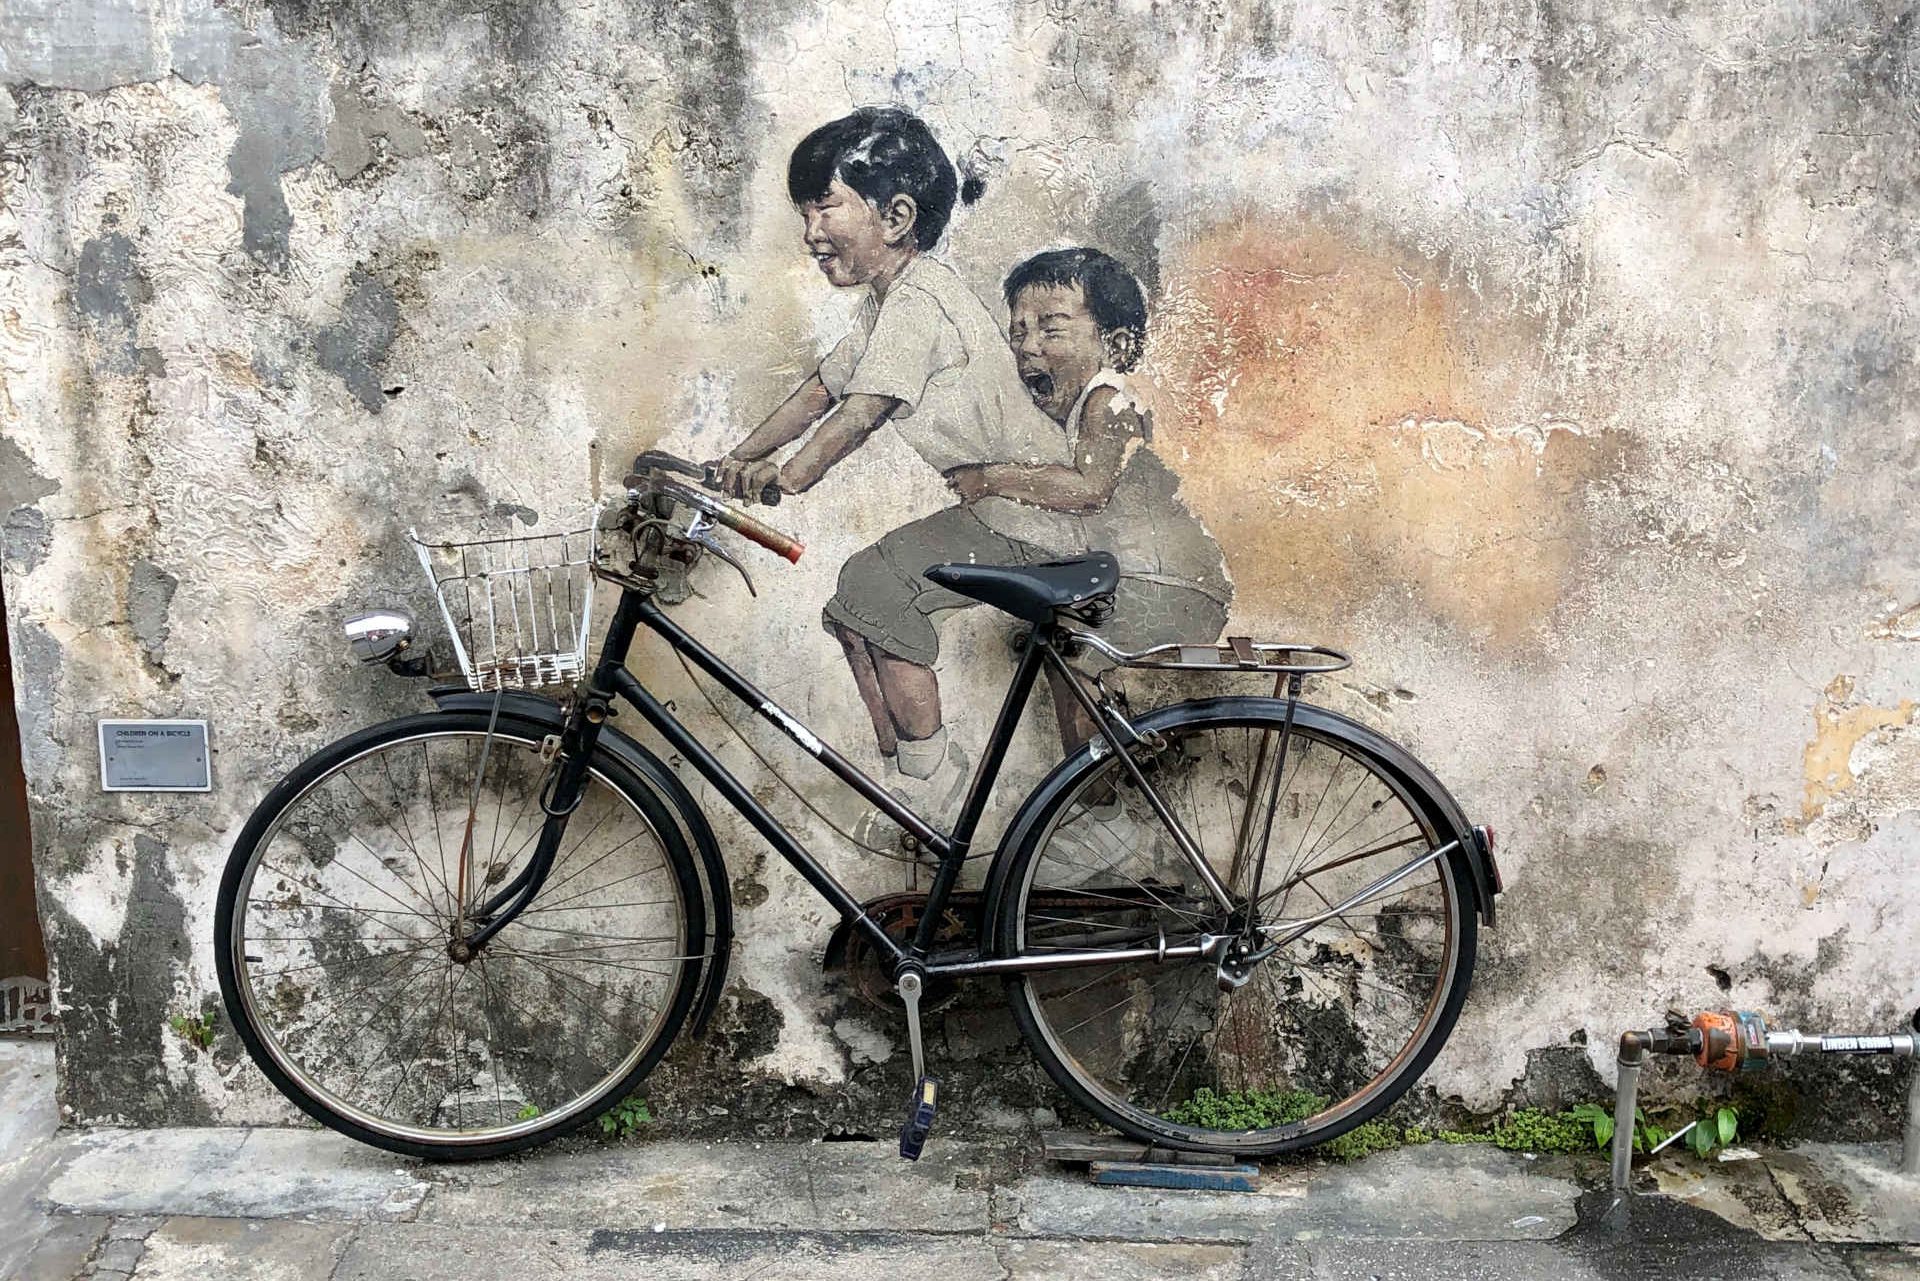 Little children on a bicycle, street art Penang